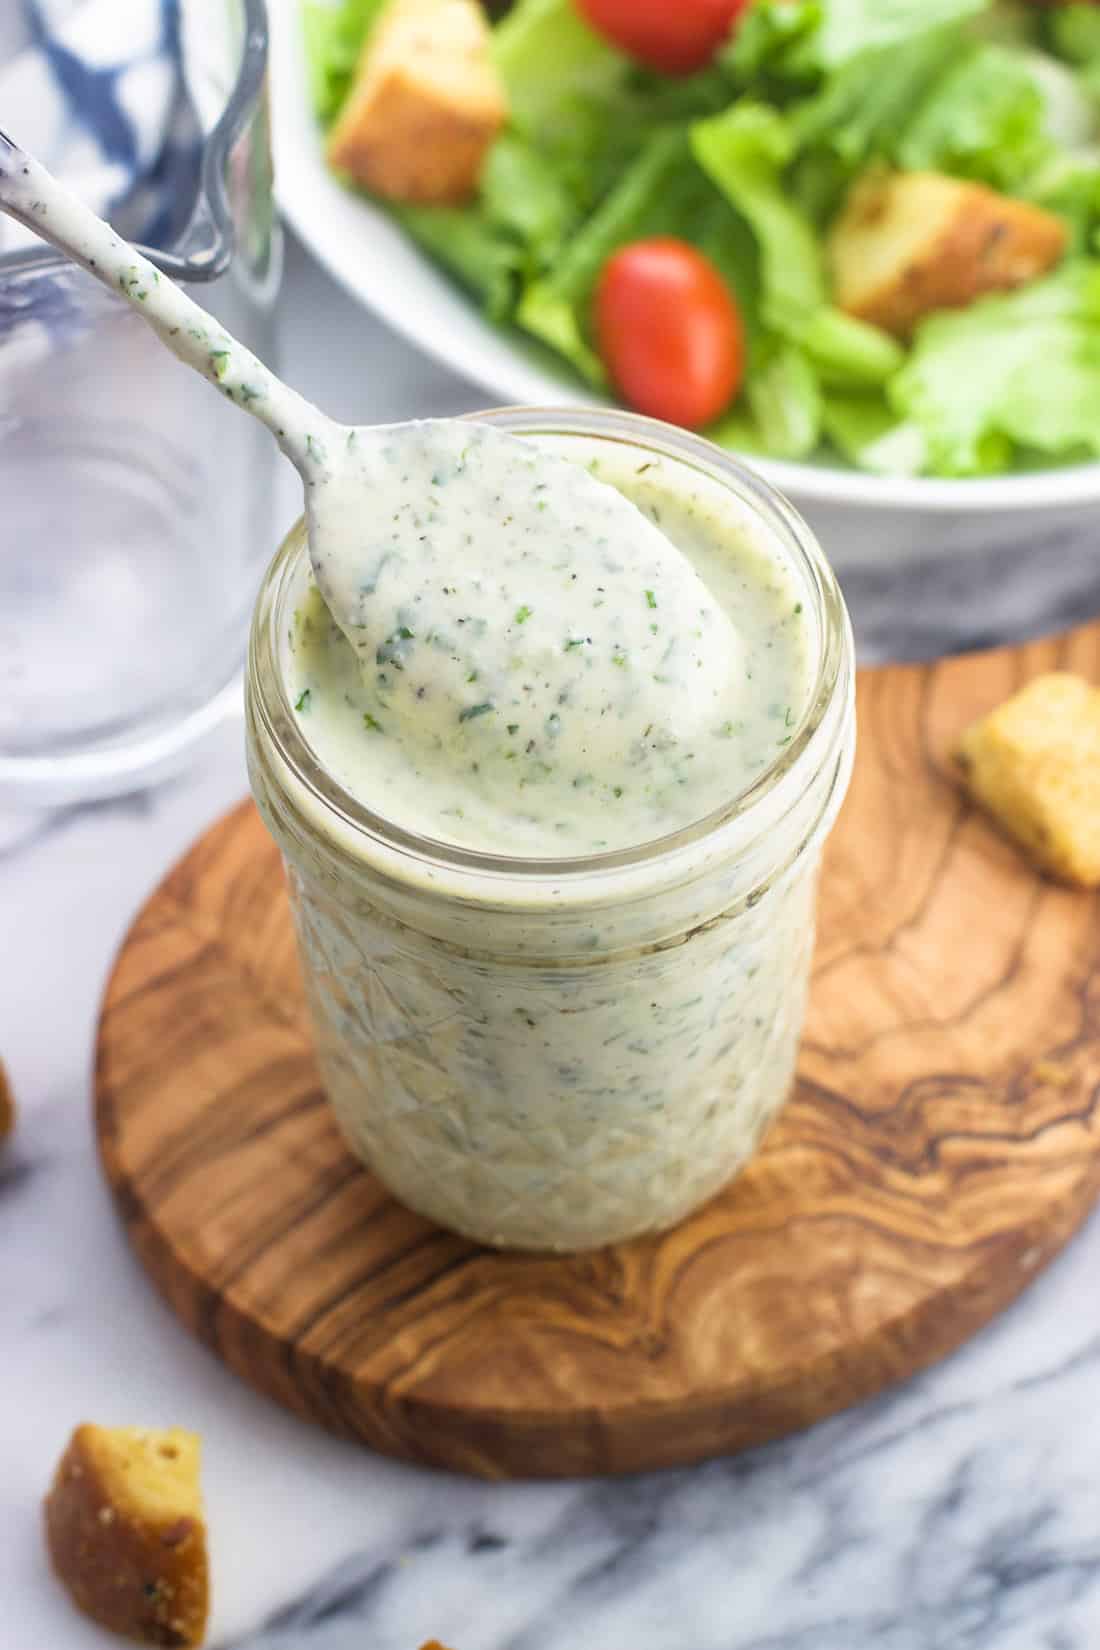 Homemade ranch dressing in a glass jar with a spoon